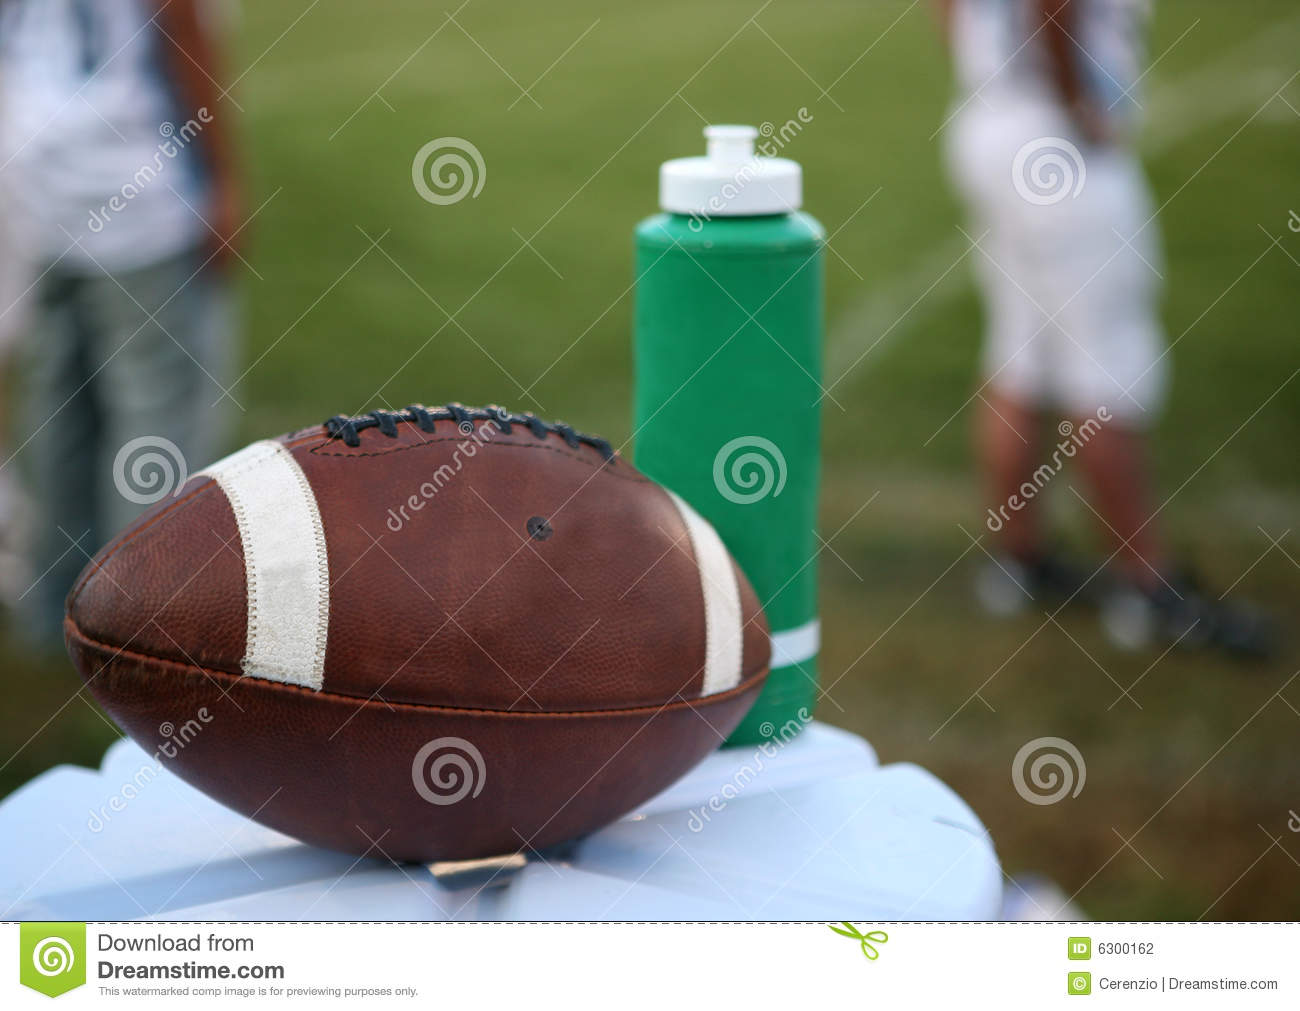 Football Resting On The Top Of A Water Jug Next To A Sports Water